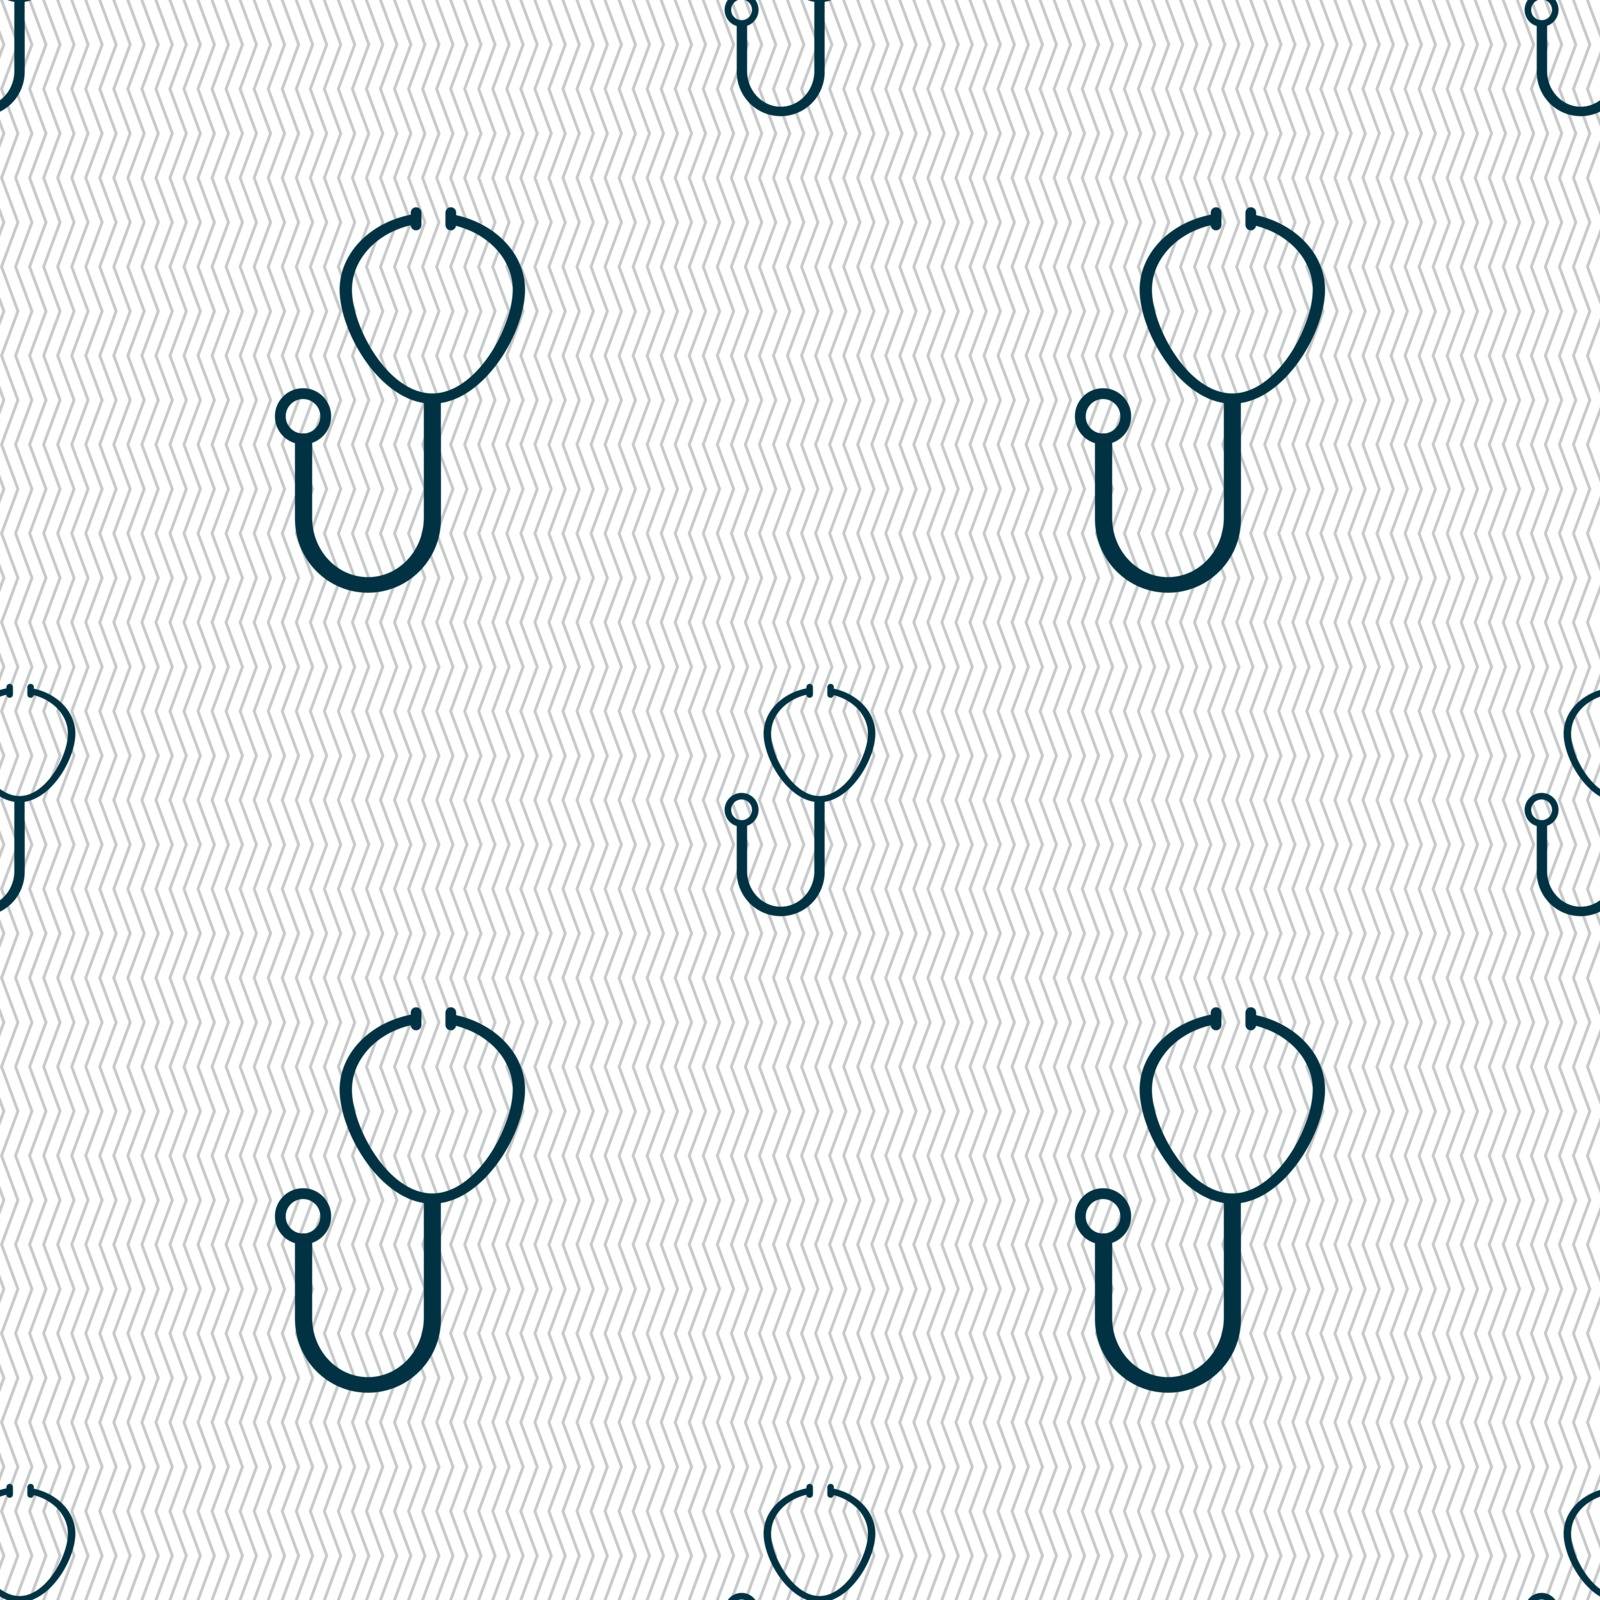 Stethoscope Icon sign. Seamless pattern with geometric texture. Vector illustration